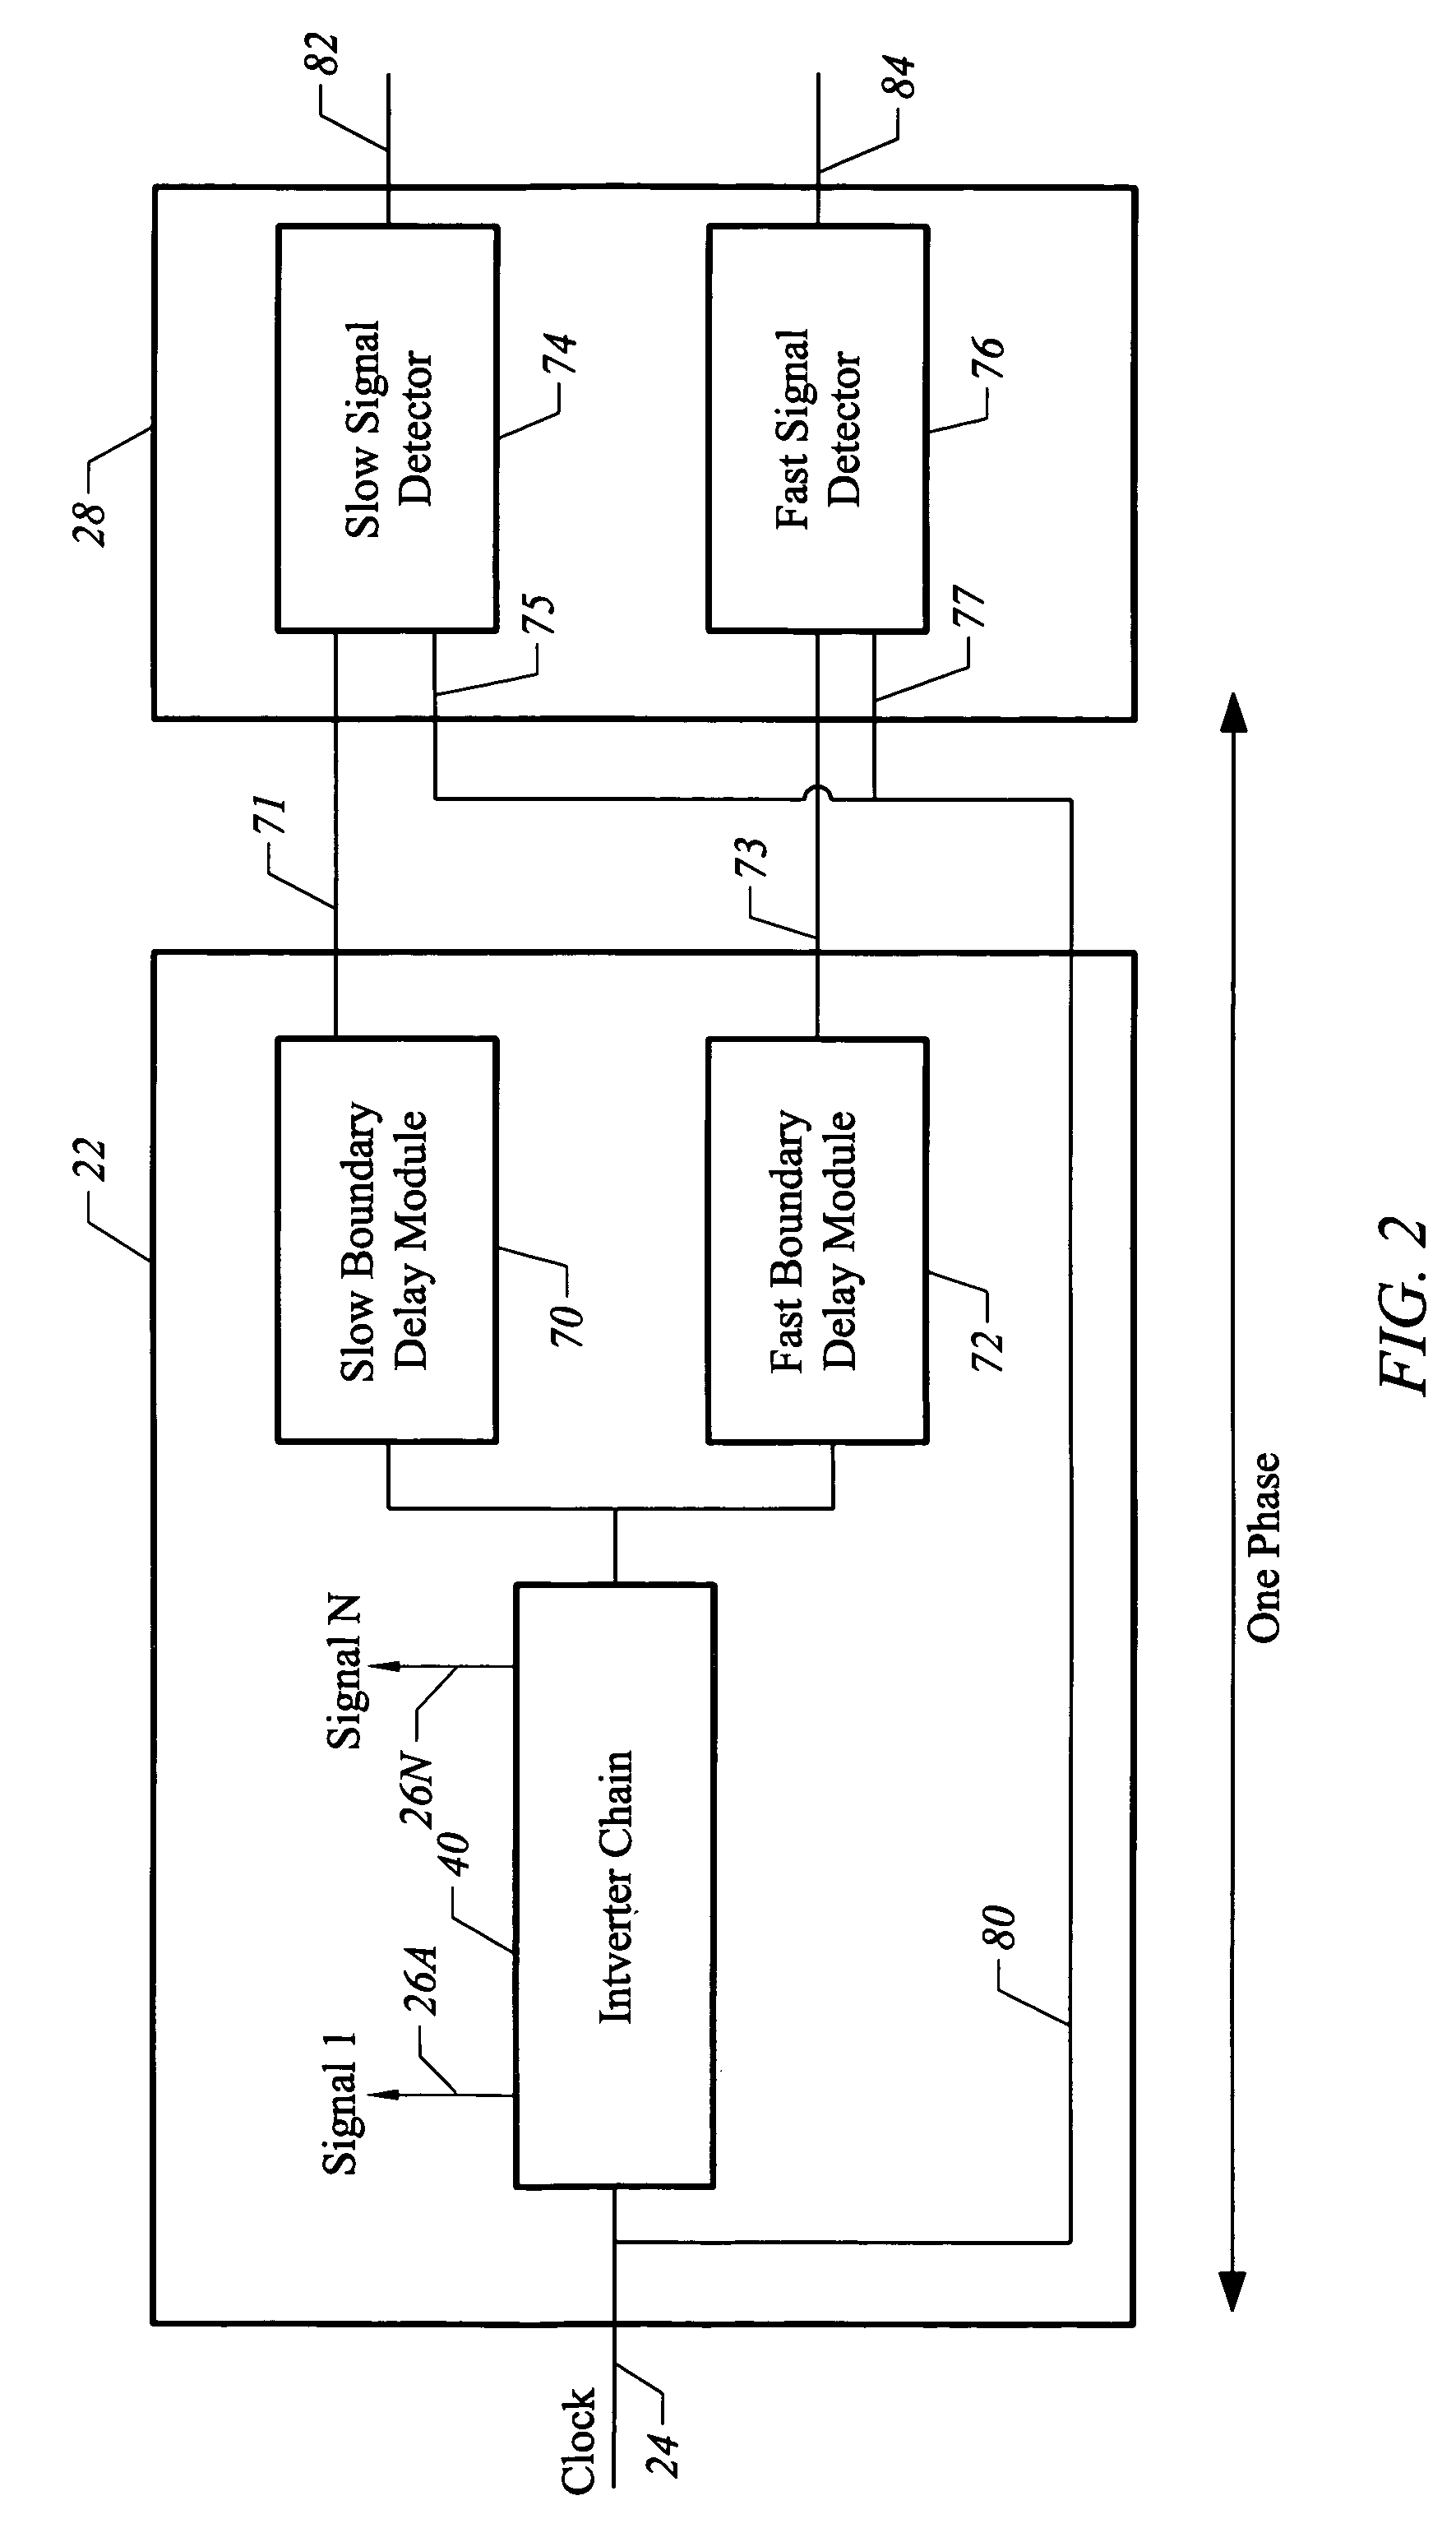 Apparatus and method for generating multi-phase signals with digitally controlled trim capacitors